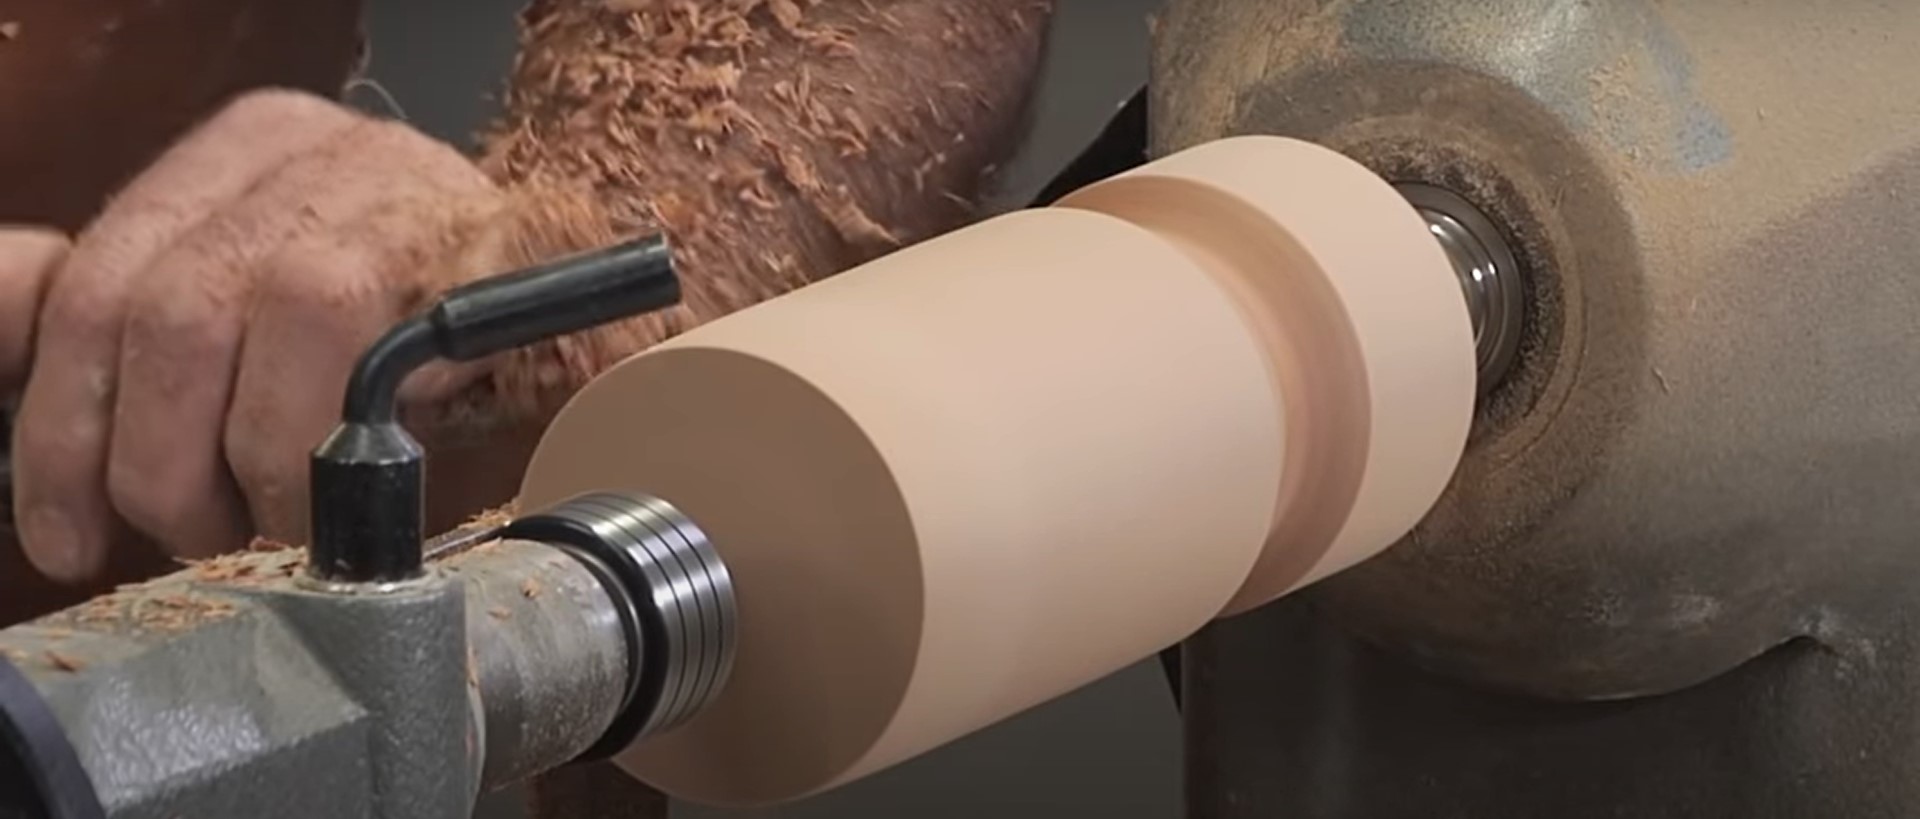 how important is reverse on a wood lathe?